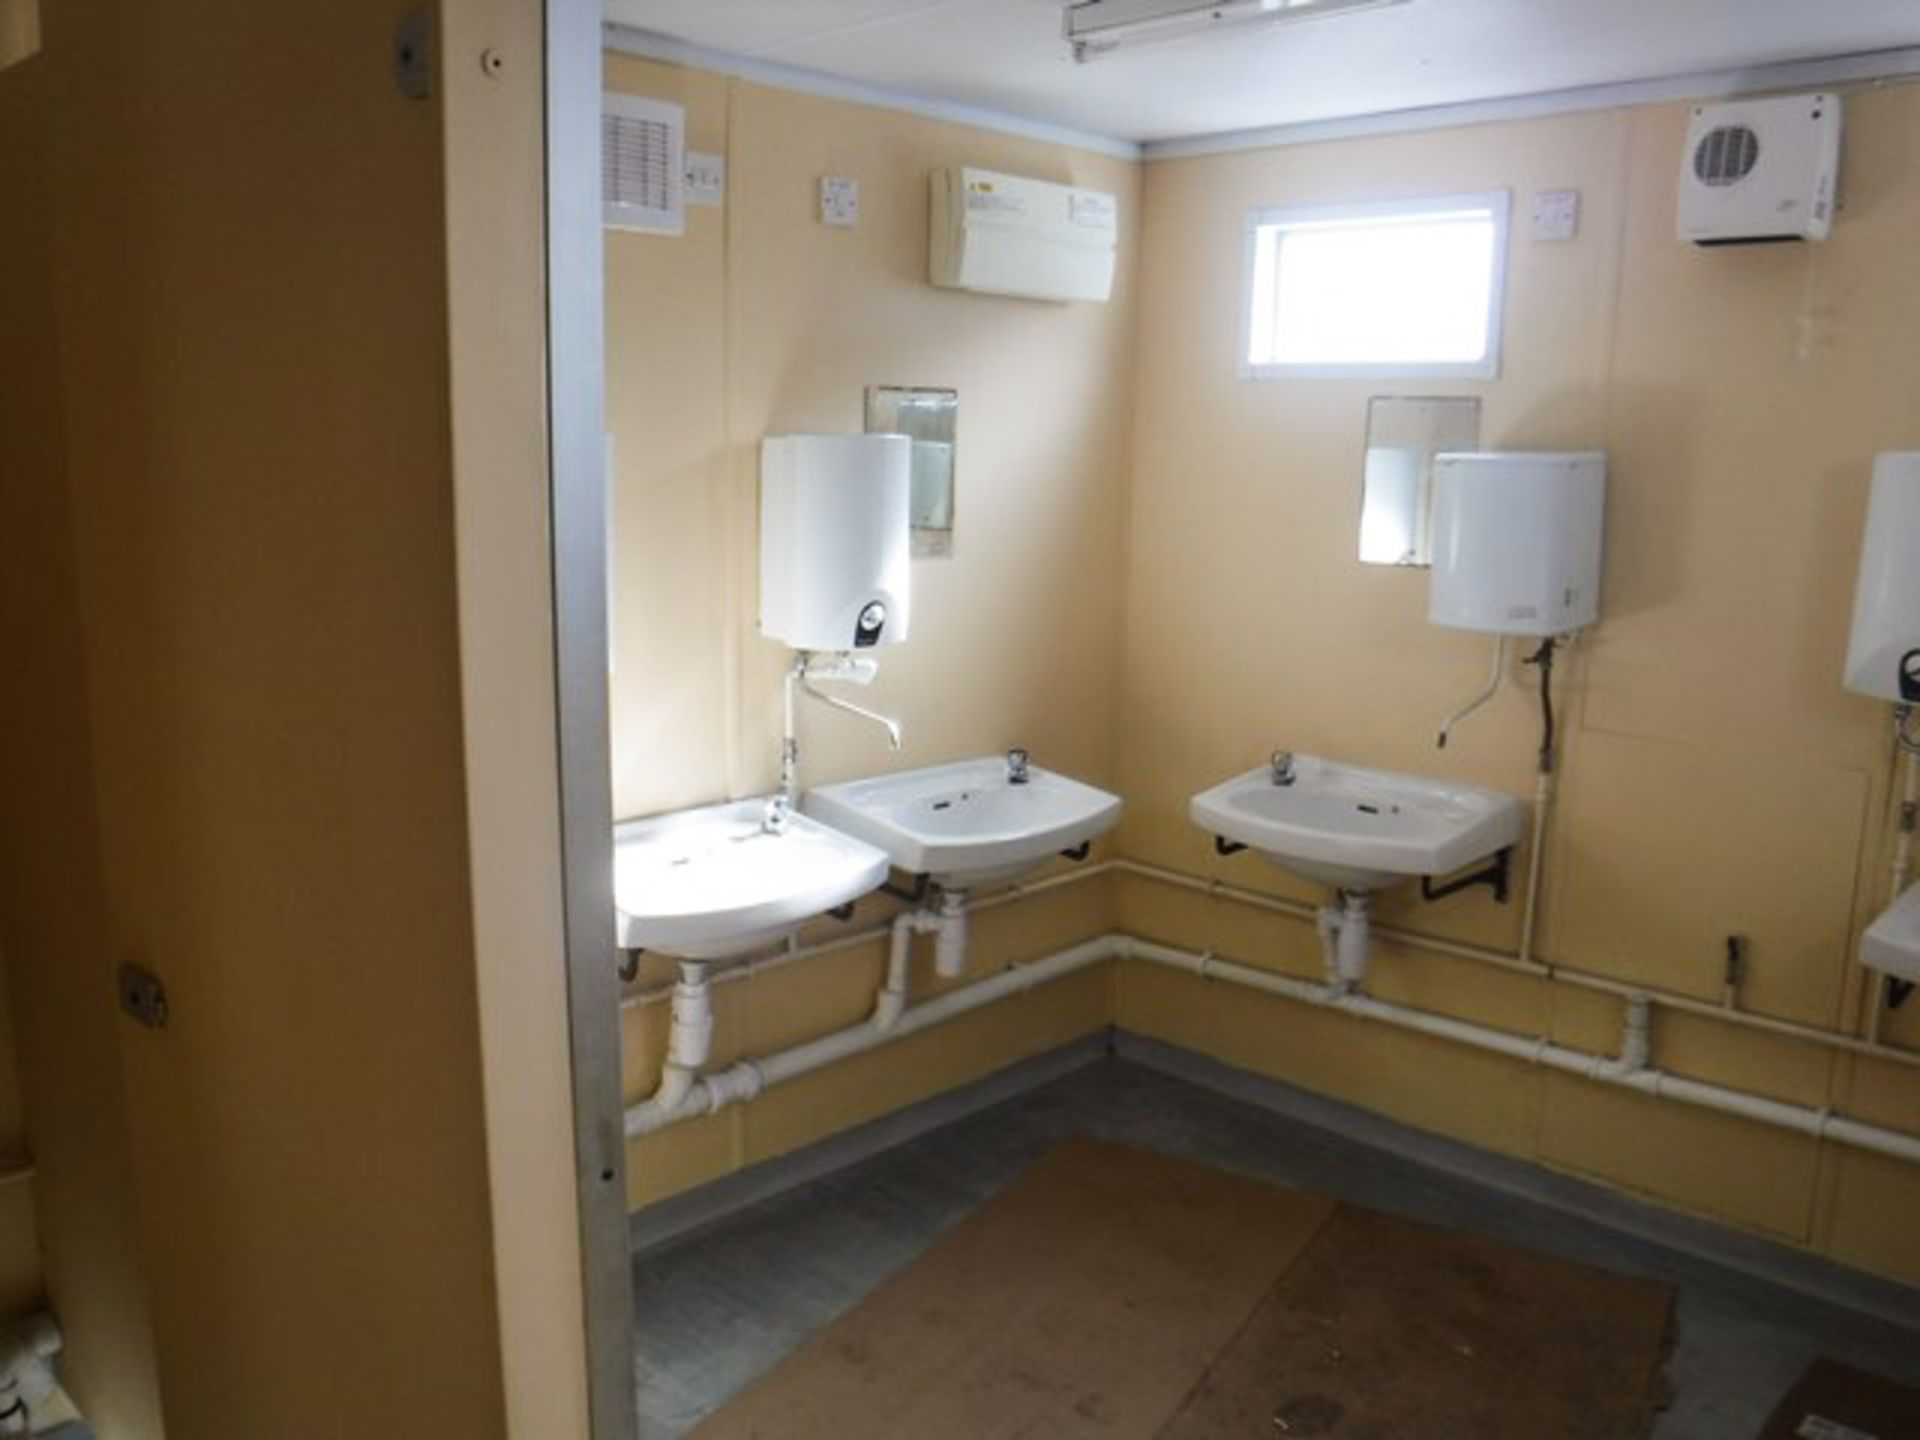 40 X 10 TOILET BLOCK, C/W 10 CUBICALS, 10 URINALS, 9 SINKS, WATER HEATERS TEMP CONTROLLED ANTI-FREEZ - Image 5 of 9